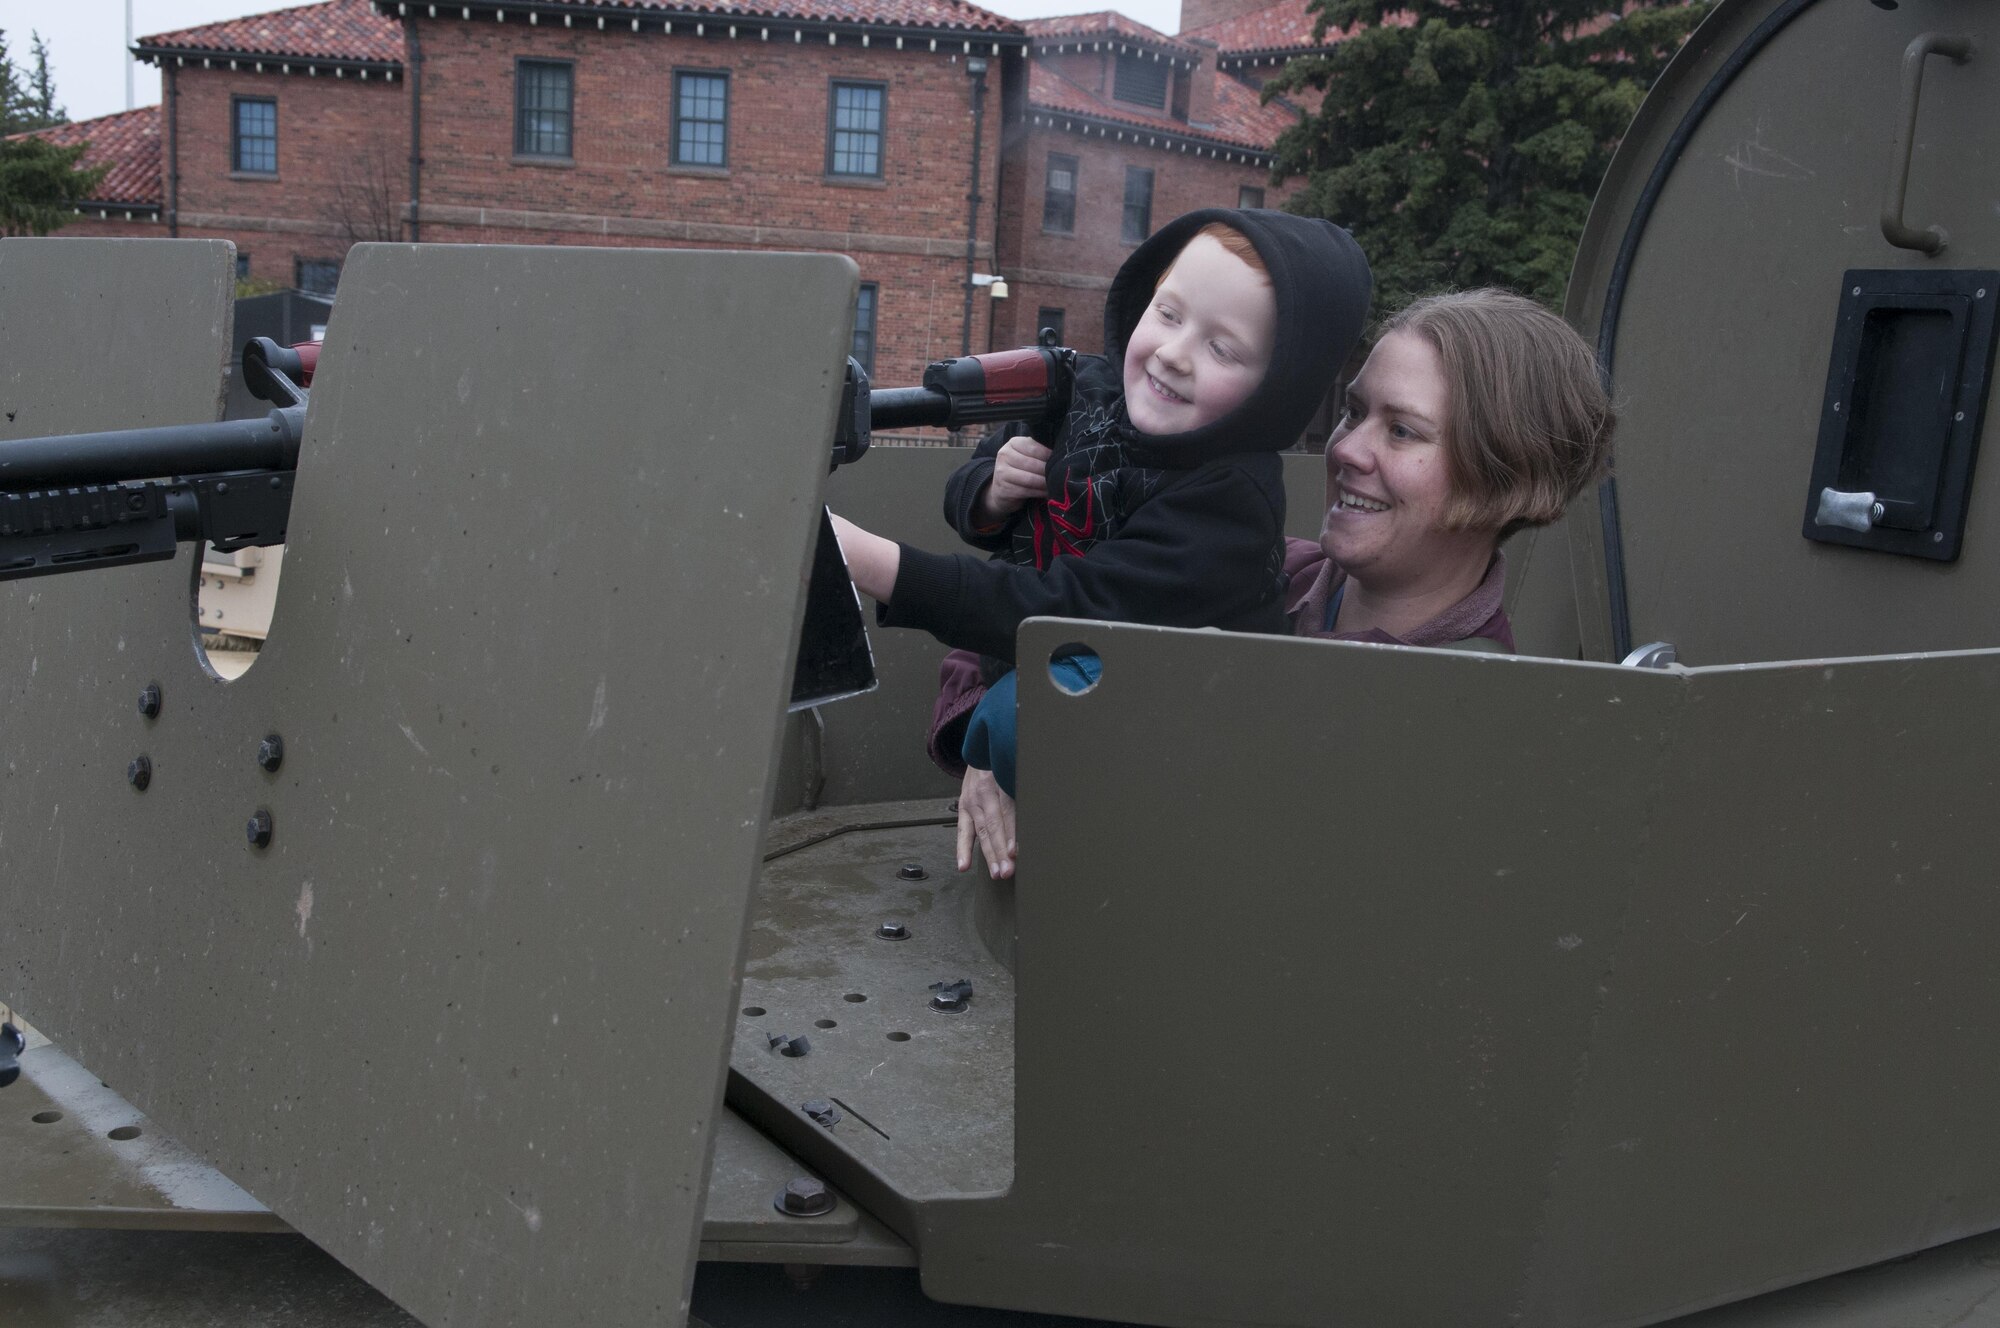 Liam White, 5, and his mother, Elizabeth, sit in a BearCat armored vehicle gunner’s seat during the city’s annual Armed Forces Day celebration at the Cheyenne, Wyo., Veterans Administration Medical Center May 14, 2016. The 90th Security Forces Group brought the BearCat and other equipment to showcase the unique mission set they have at F.E. Warren Air Force Base. Local families were able to check out the interior of security forces vehicles. (U.S. Air Force photo by Airman 1st Class Malcolm Mayfield)